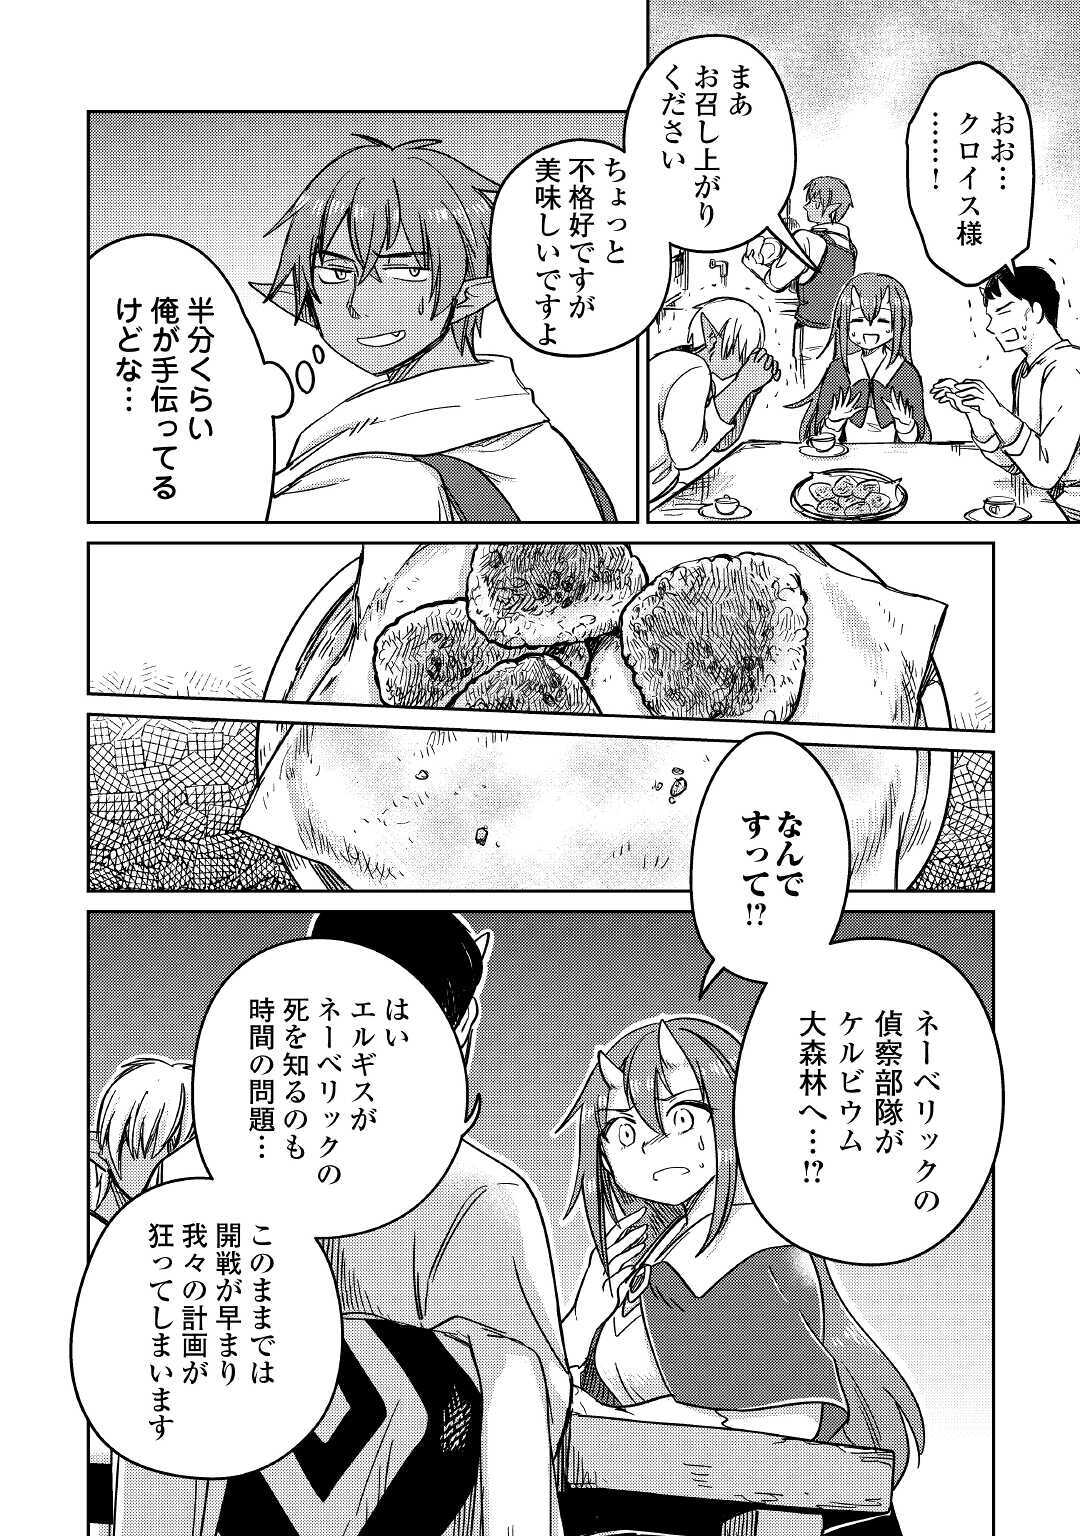 The Former Structural Researcher’s Story of Otherworldly Adventure 第30話 - Page 18